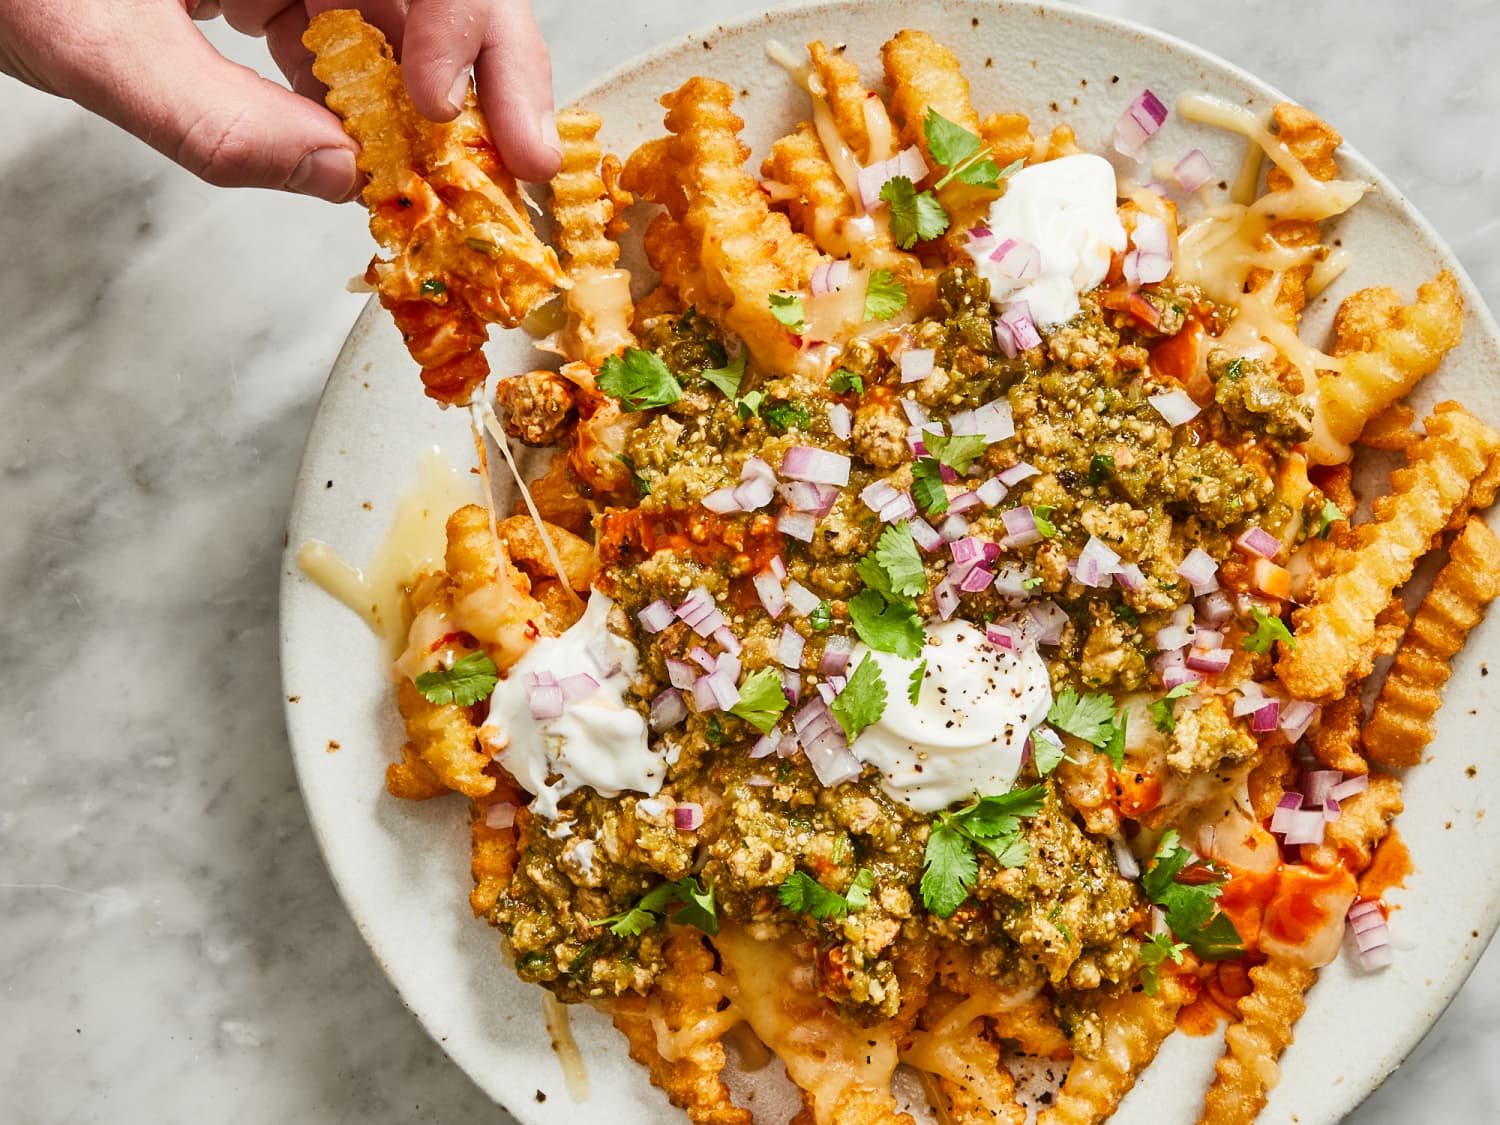 Best Frozen French Fries, According to Food Network Staffers, FN Dish -  Behind-the-Scenes, Food Trends, and Best Recipes : Food Network